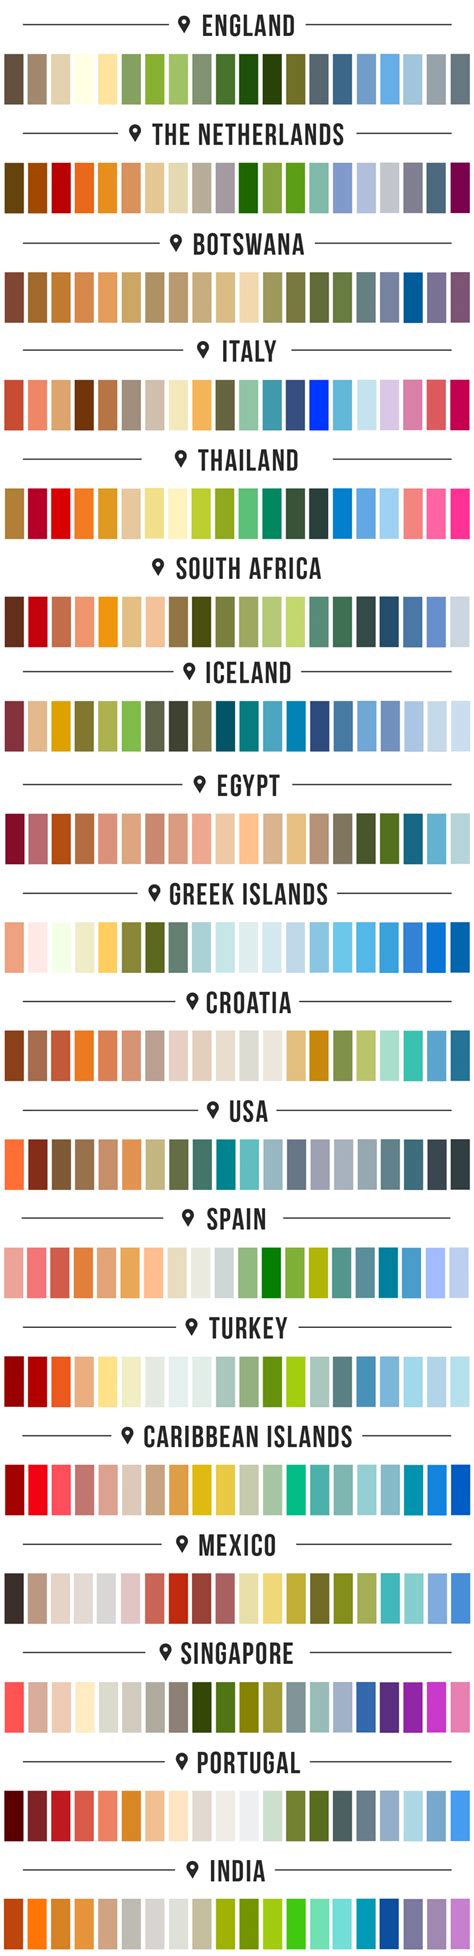 Beautiful Color Palettes Of Countries From Around The World